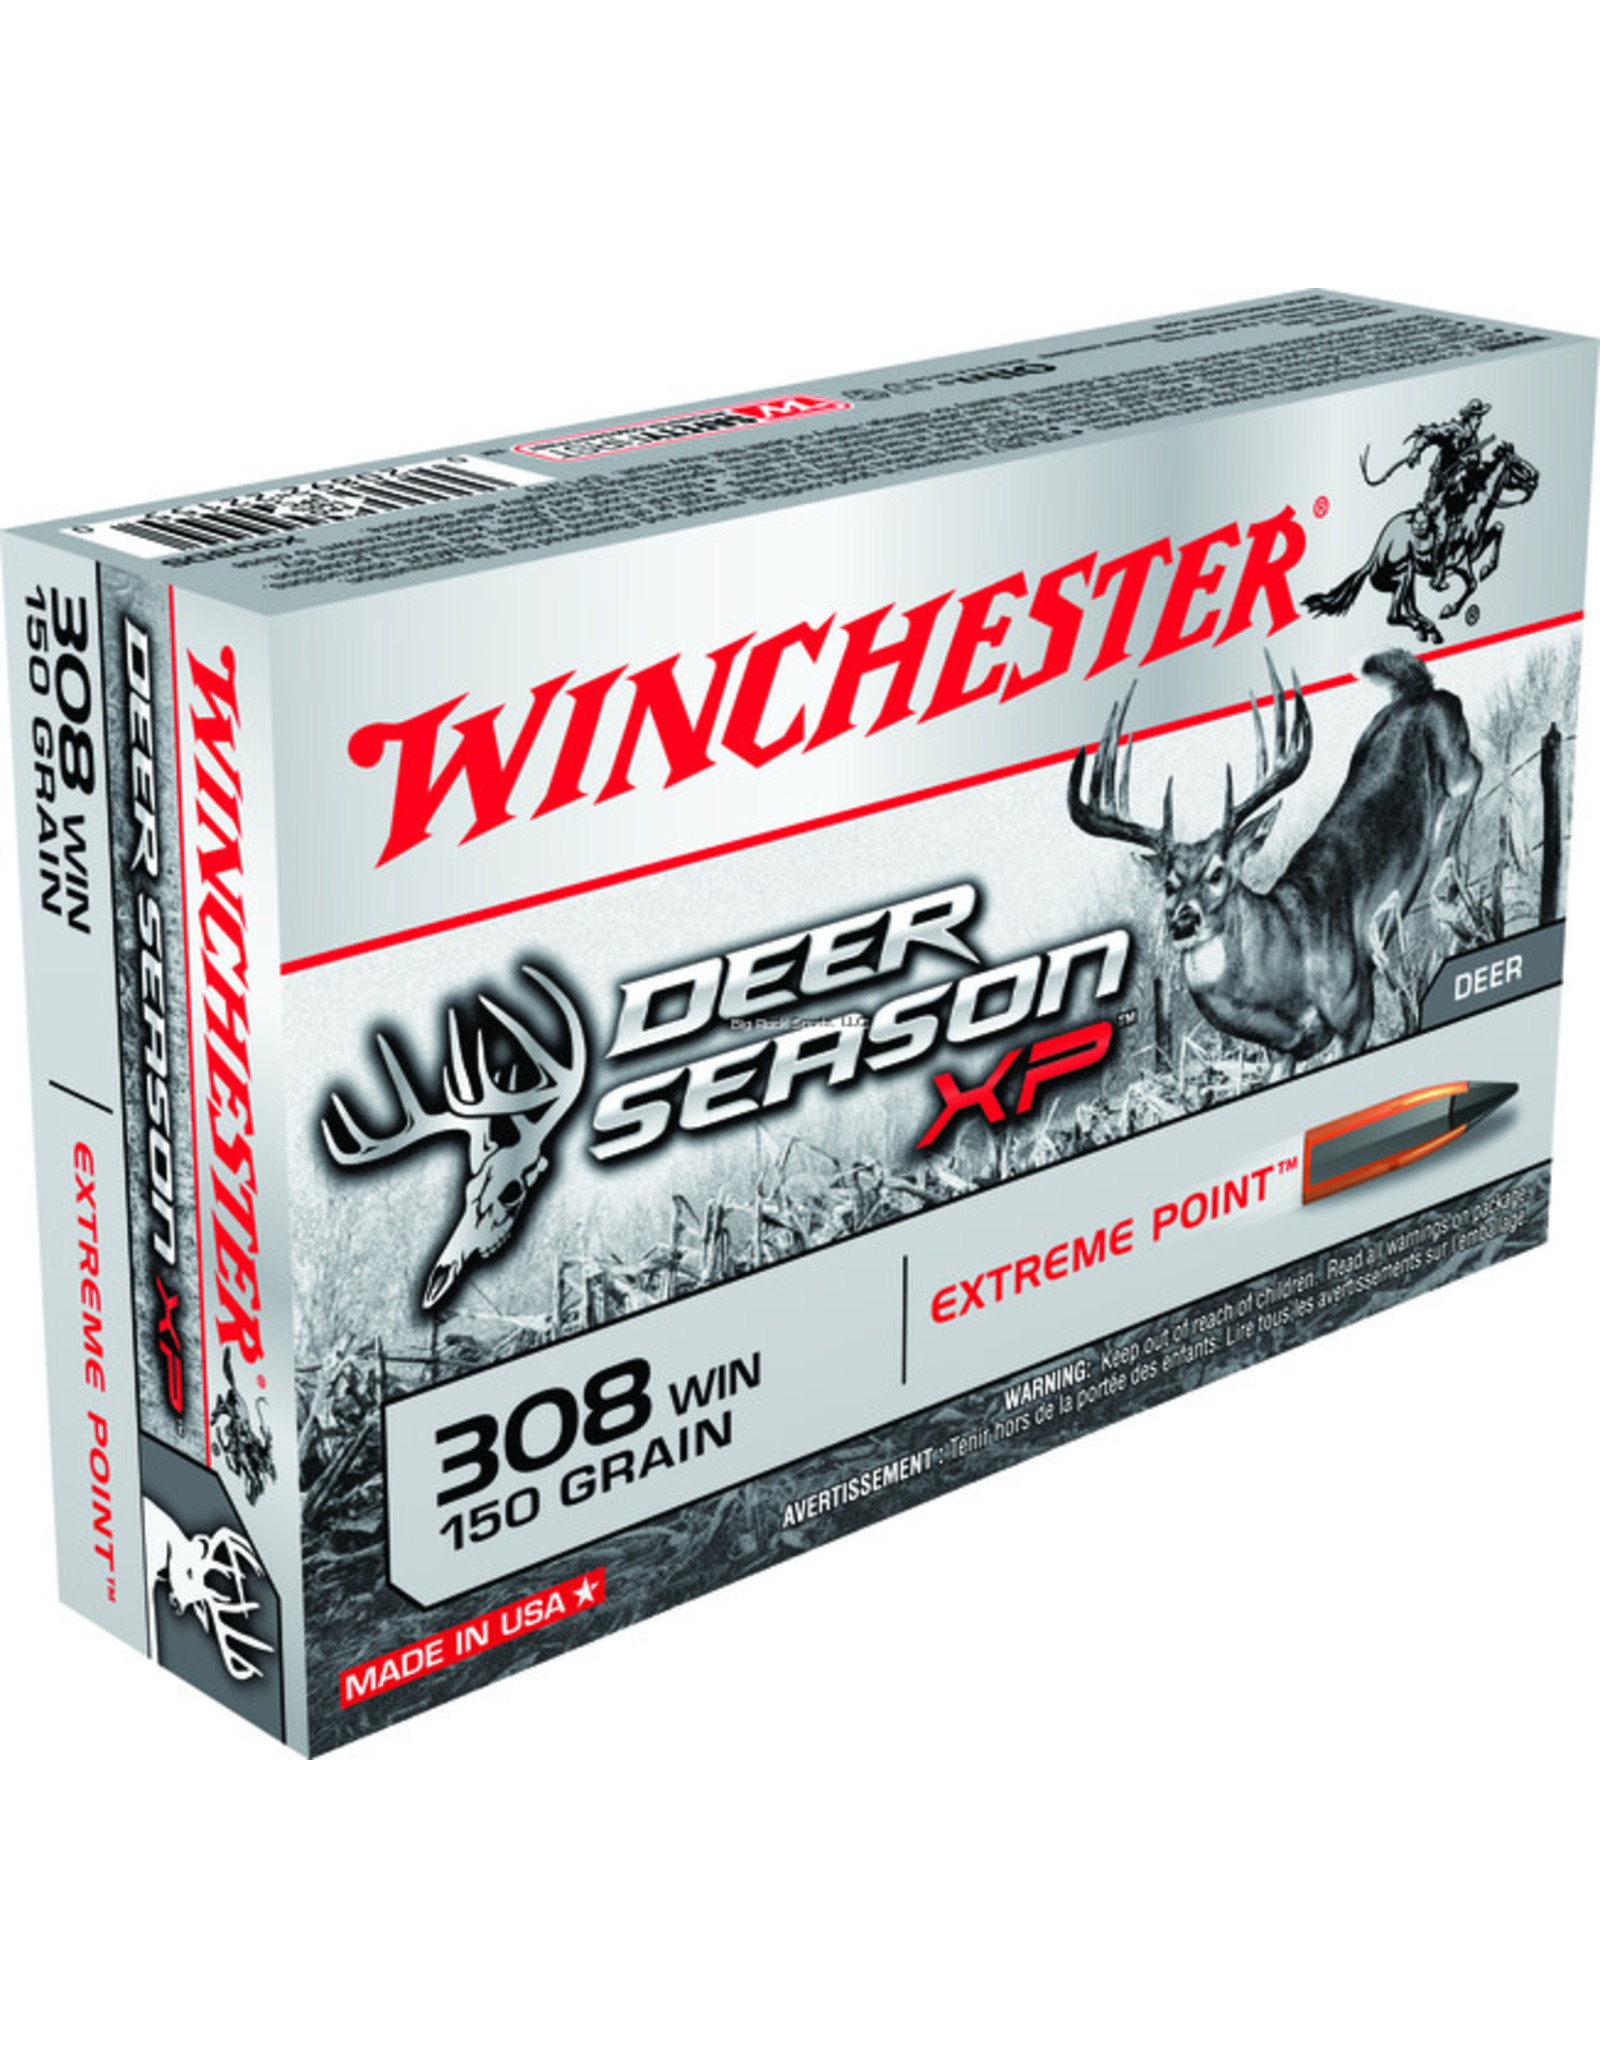 Winchester Winchester X308DS Deer Season XP Rifle Ammo 308 , Extreme Point Polymer Tip, 150 Grains, 2820 fps, 20, Boxed